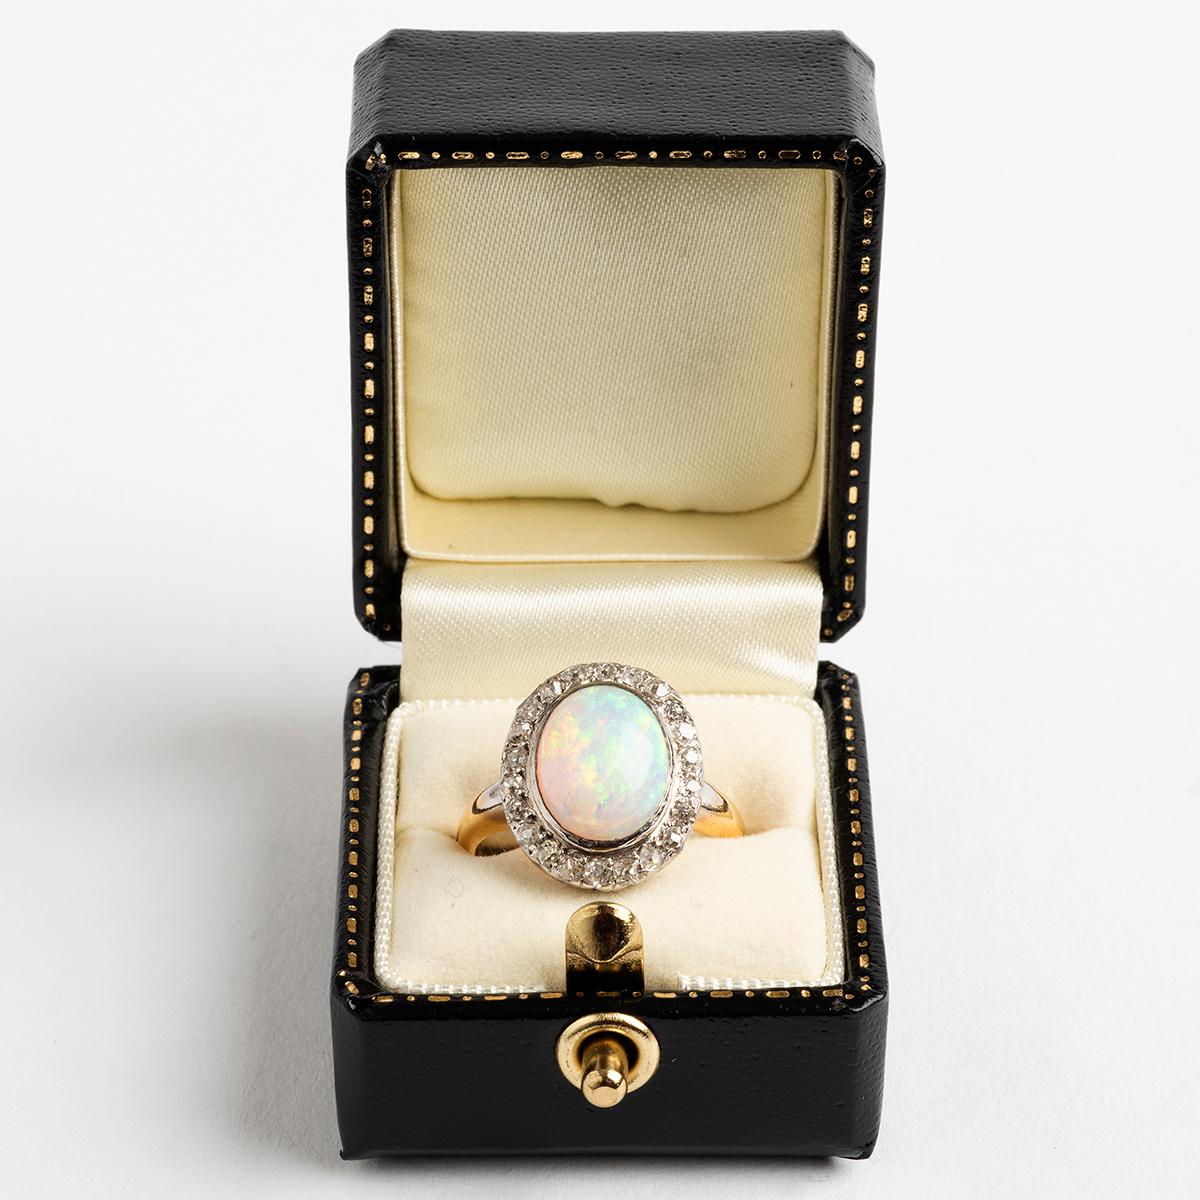 Our antique opal cabochon with diamond cluster ring is set in platinum and 18k gold. A stunning and quality stone, in a beautiful setting , which adds vintage charm to any collection. The ring size is M.

A unique piece within our carefully curated